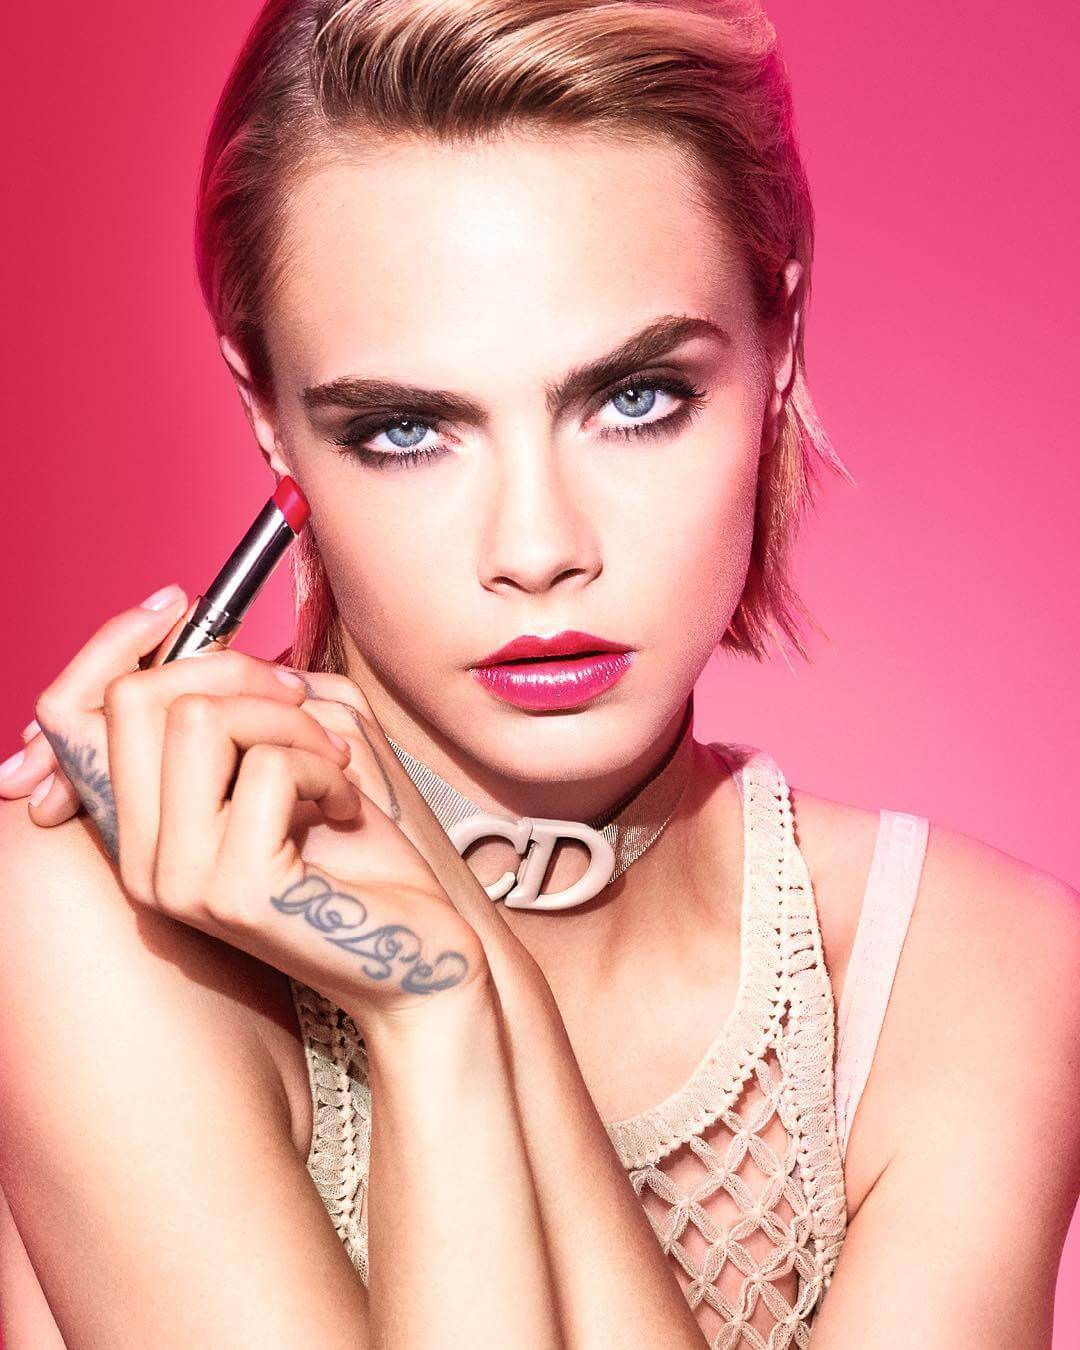 Cara Delevingne Rocks the Classic Dior Look with Pink Moment Glam Makeup!